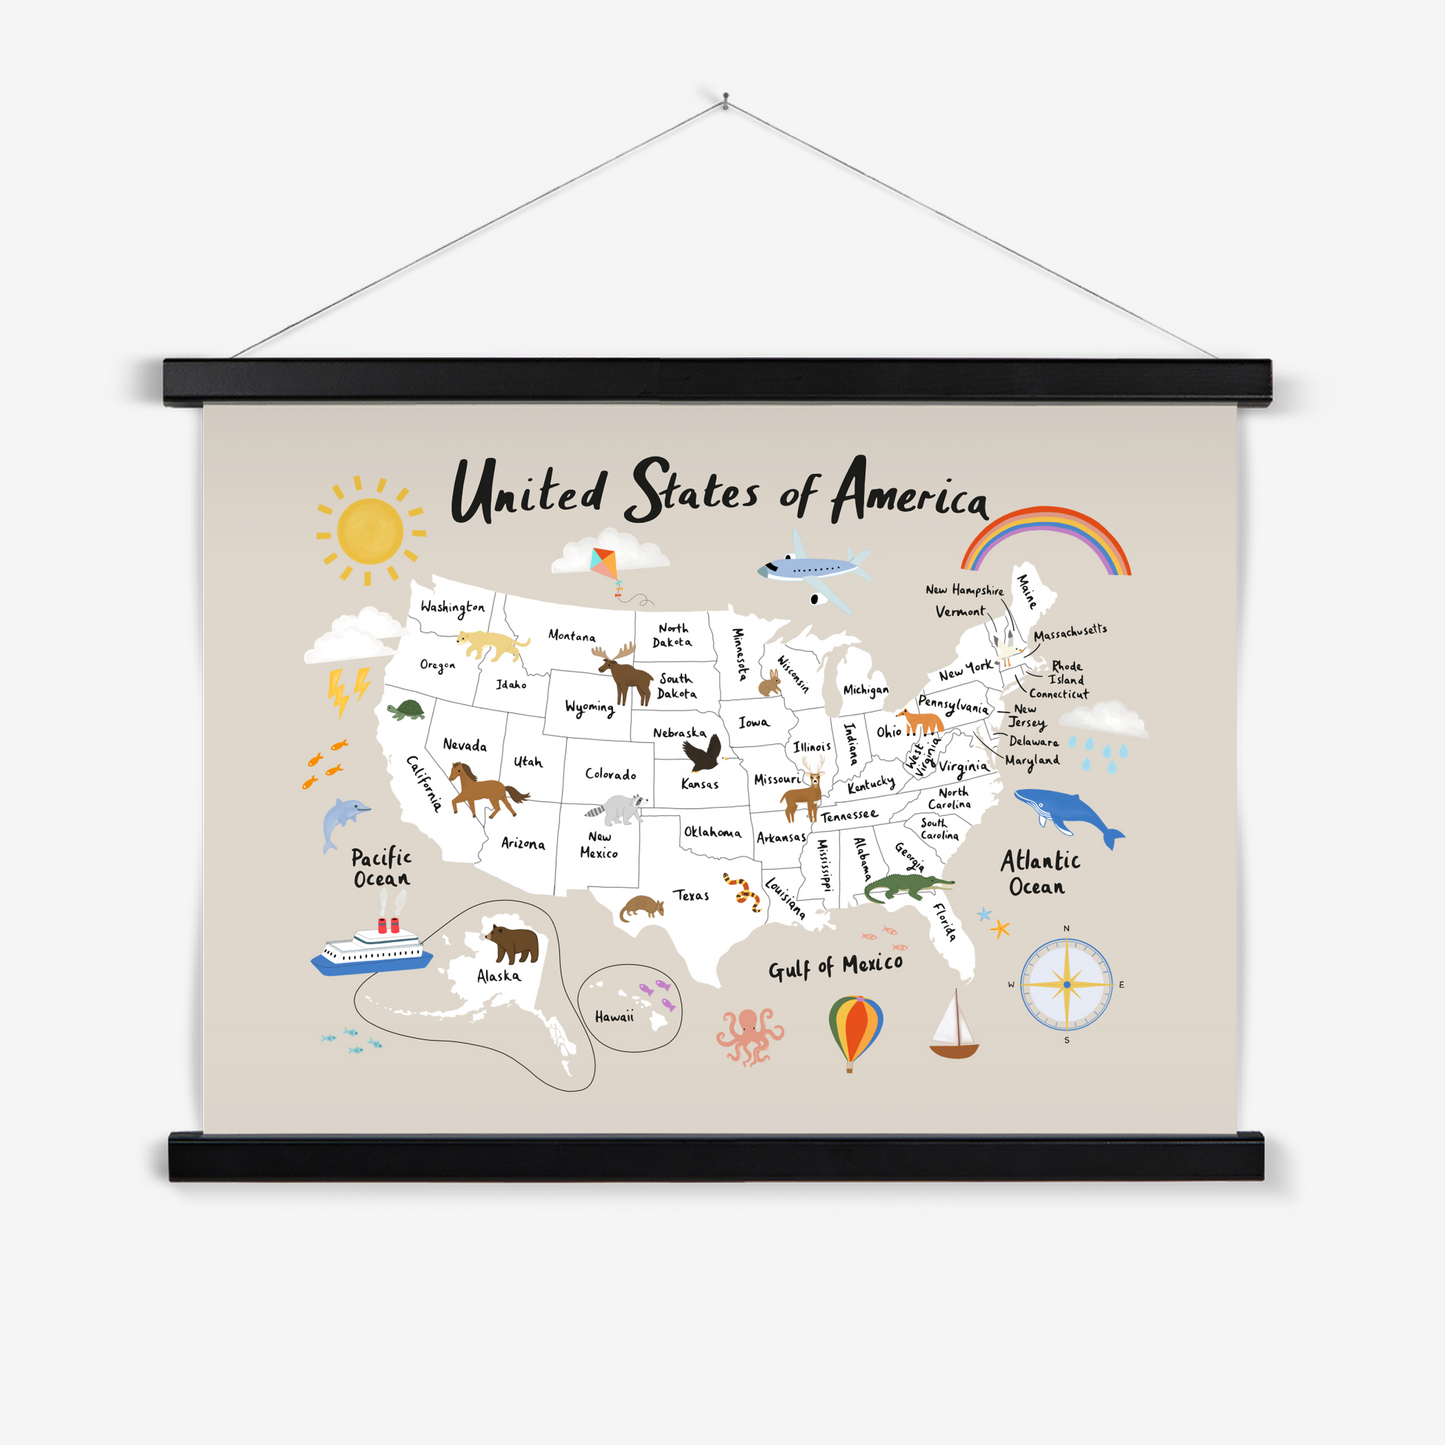 United States of America in stone / Print with Hanger